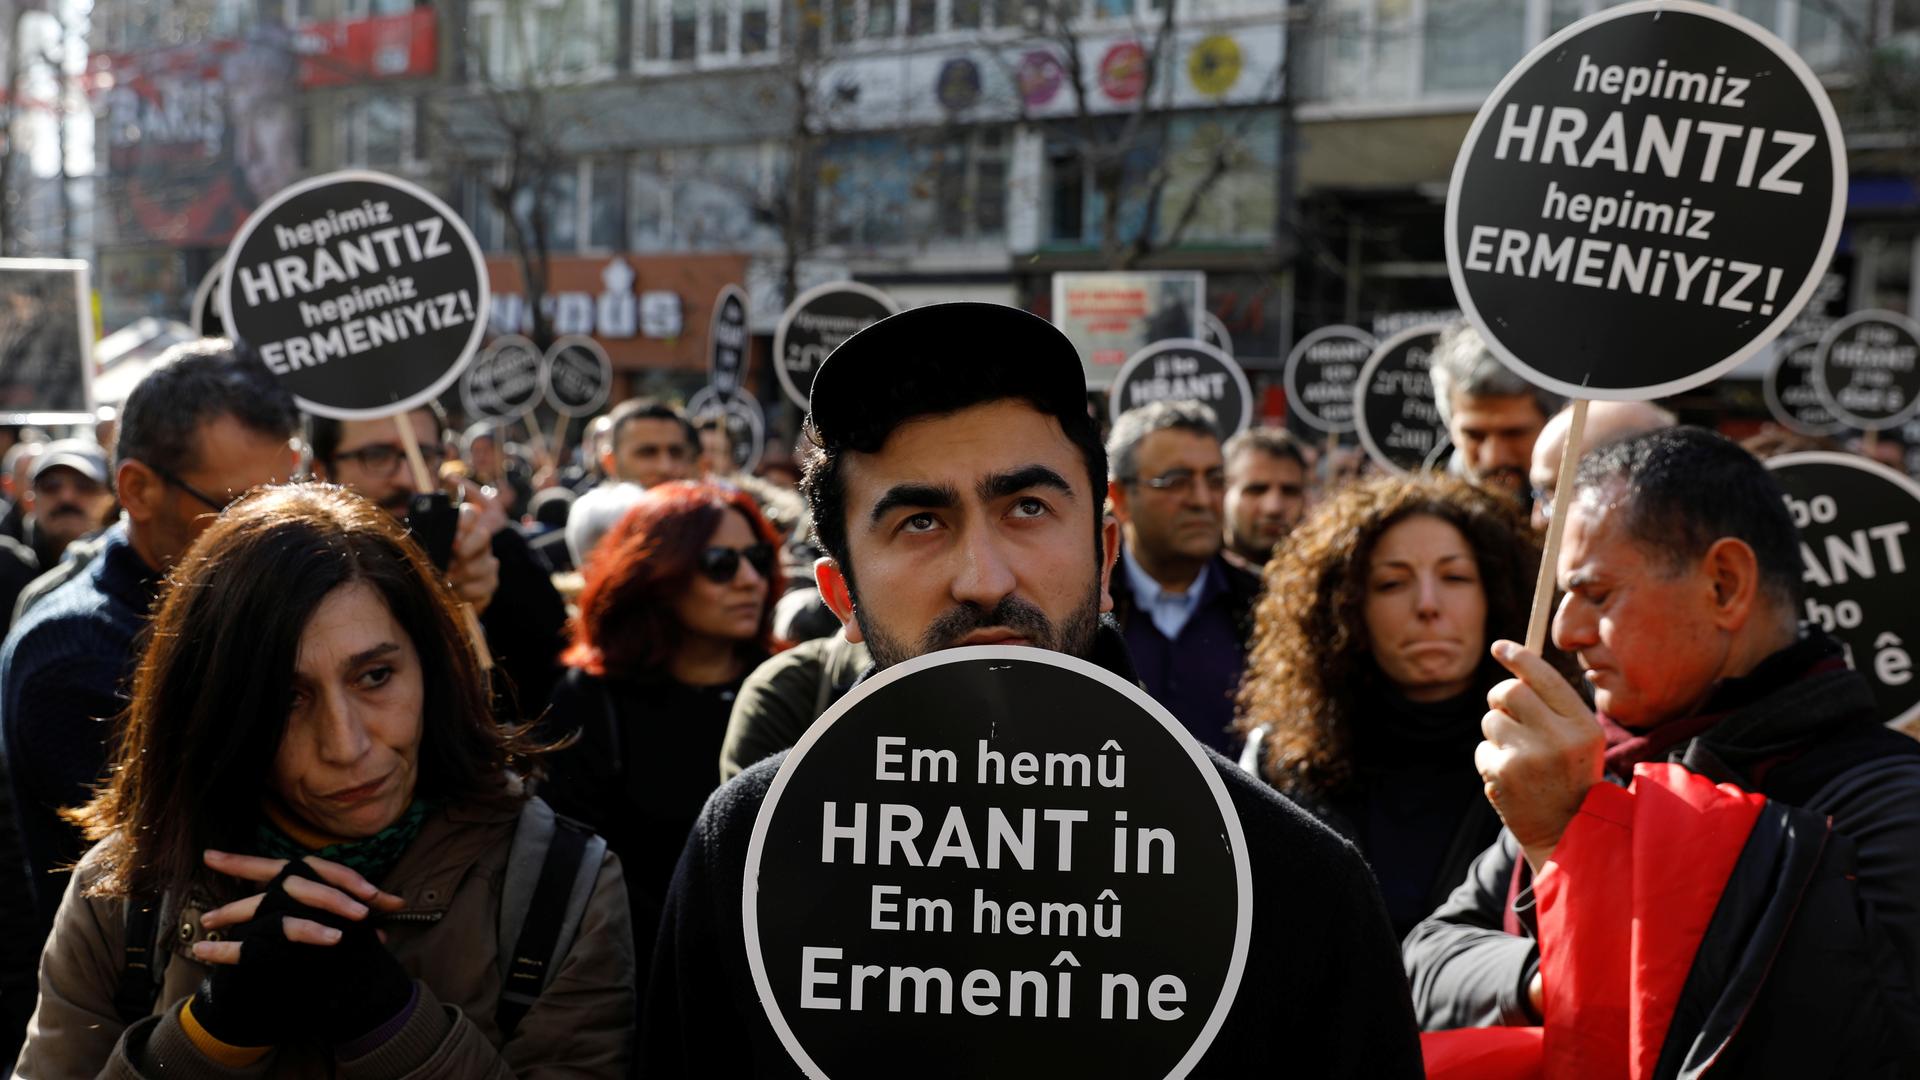 Protesters carry black sign with white writing in support of slain Armenian journalist. 